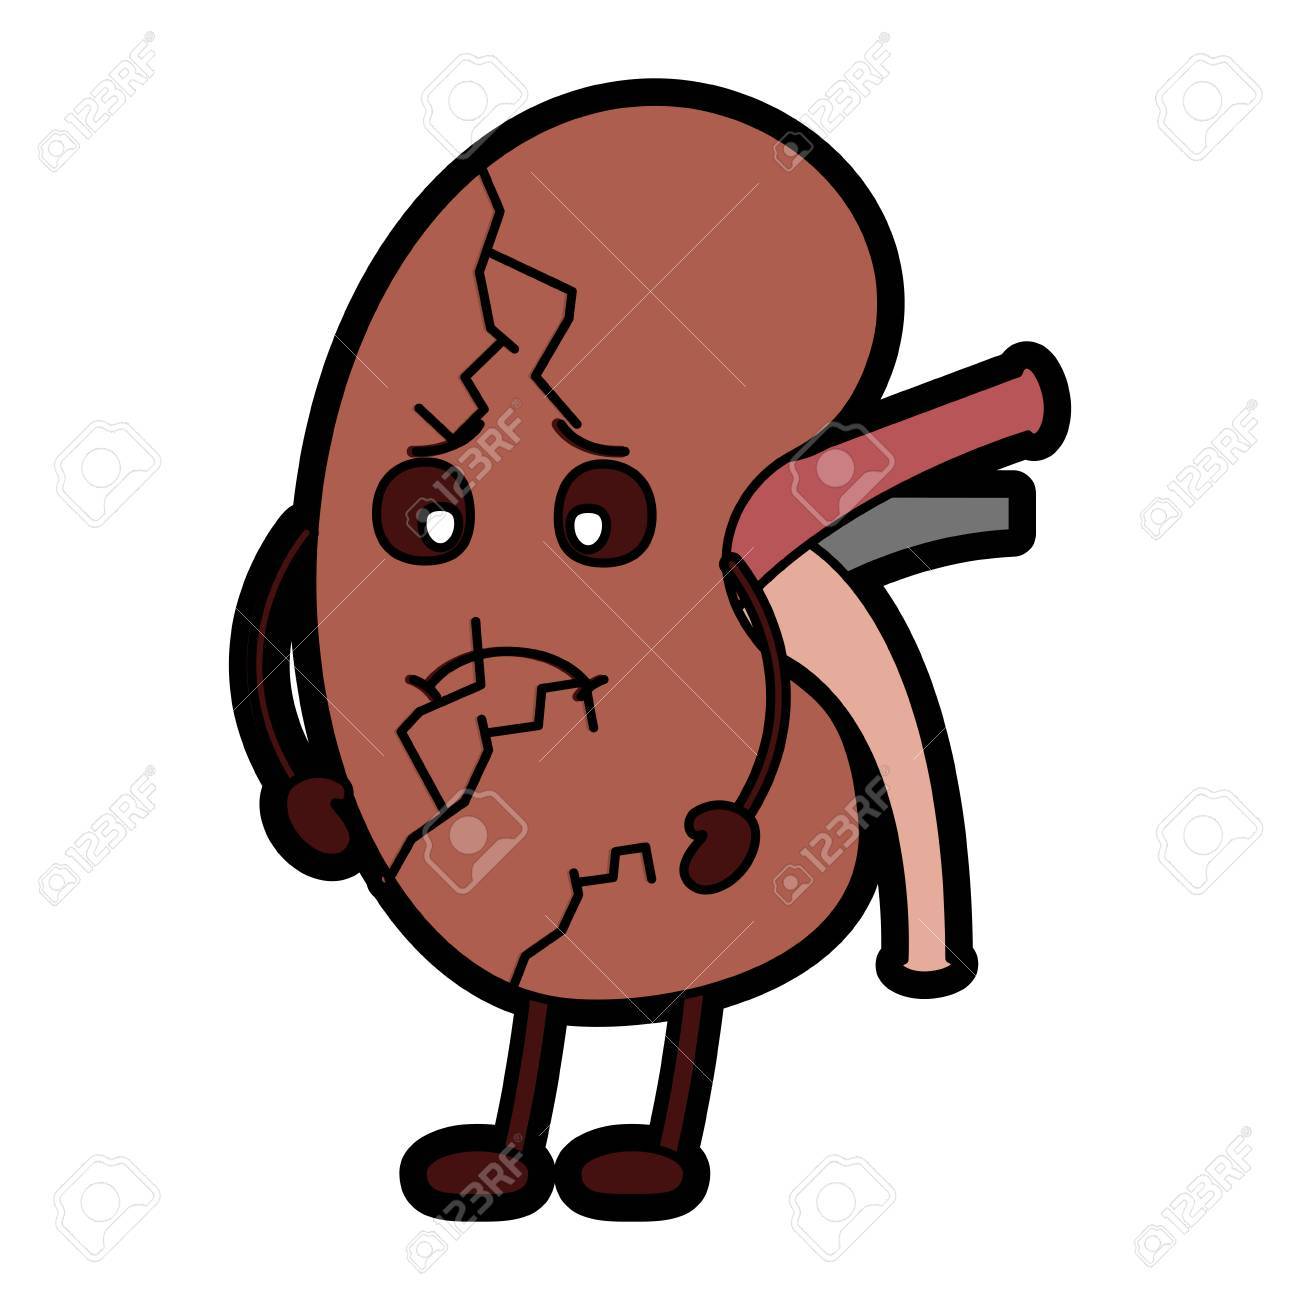 kidney clipart character